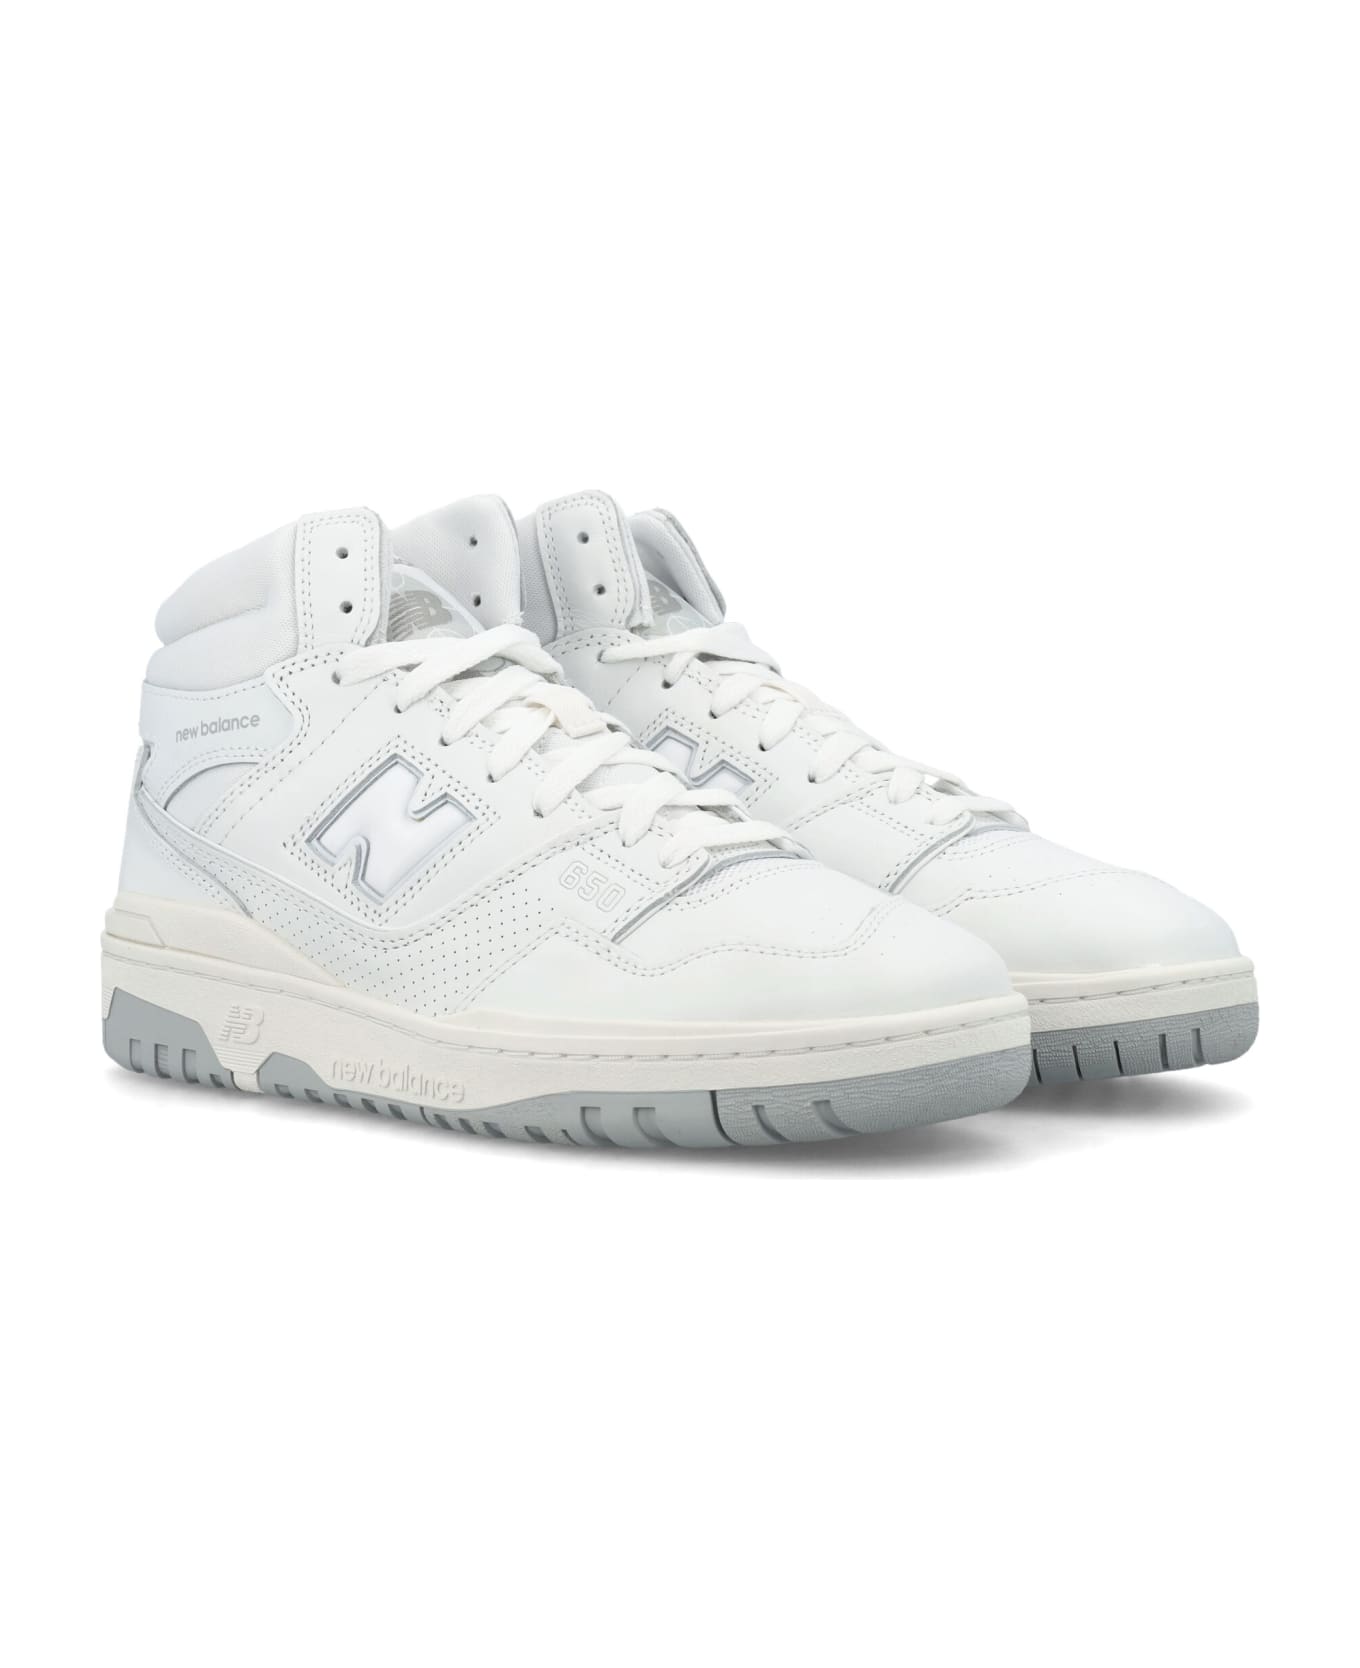 New Balance 650 High Top Sneakers - WHITE